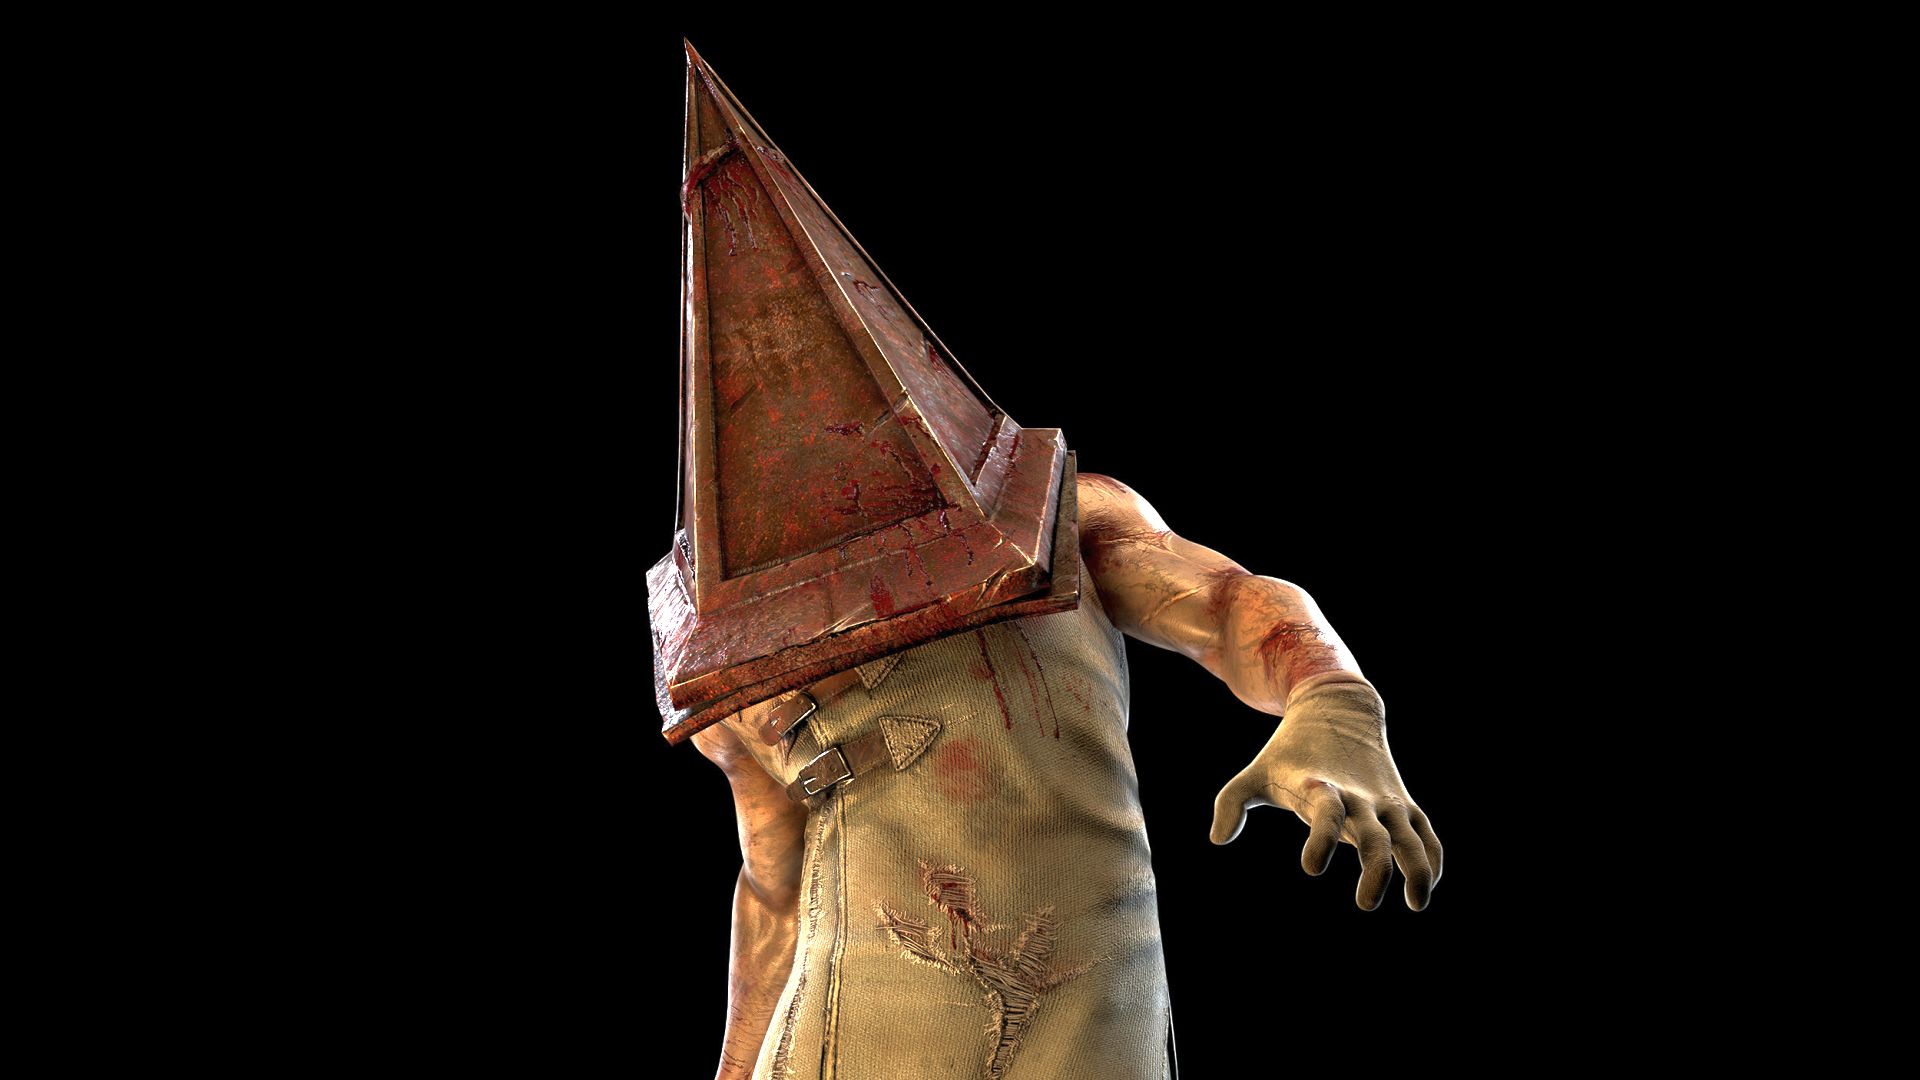 Dead by Daylight: Silent Hill - 10 Minutes of Pyramid Head